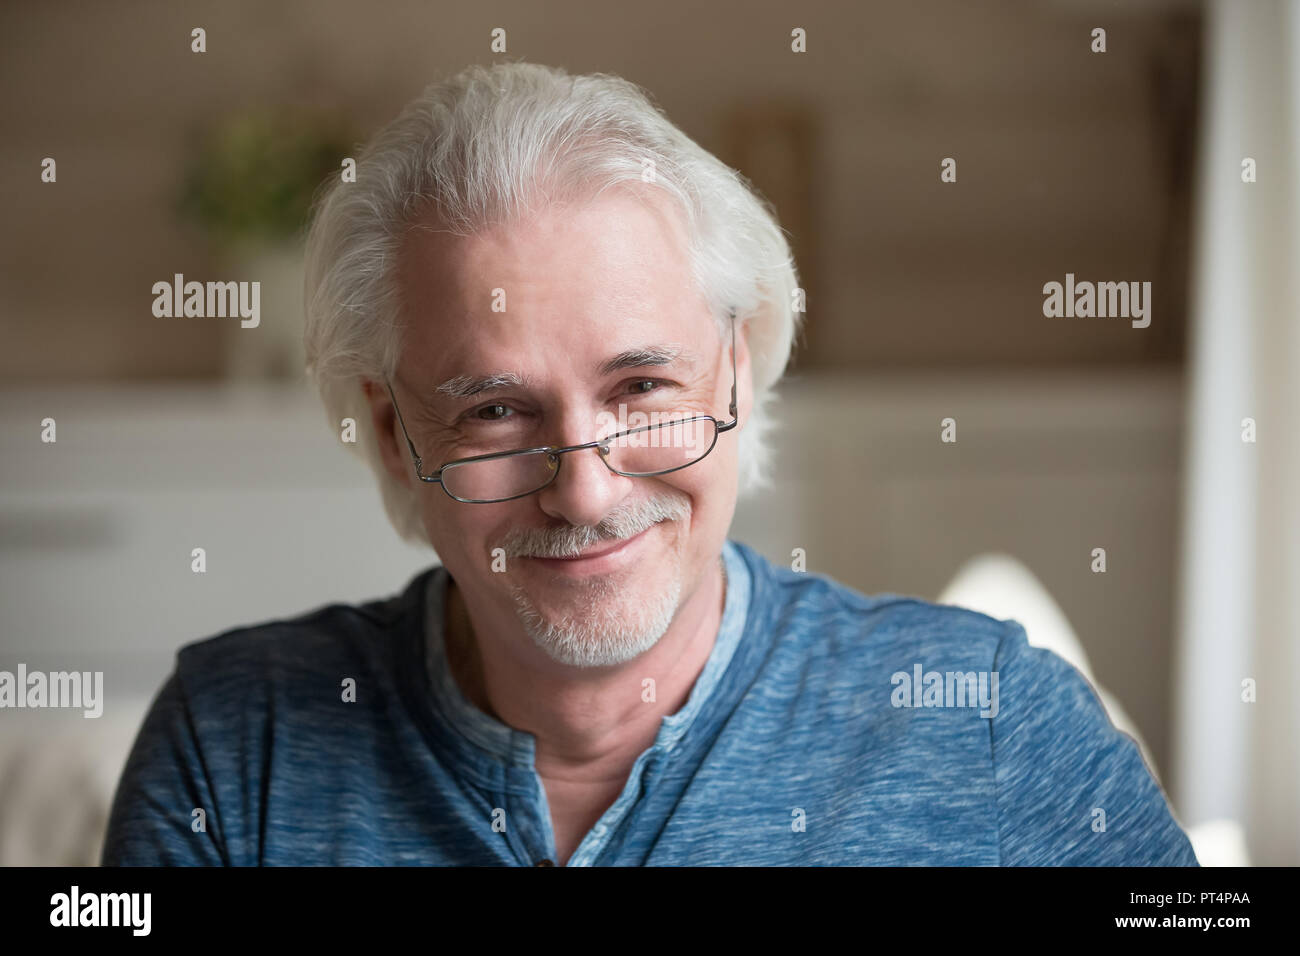 Charming middle aged grey haired man looking at camera, portrait Stock Photo